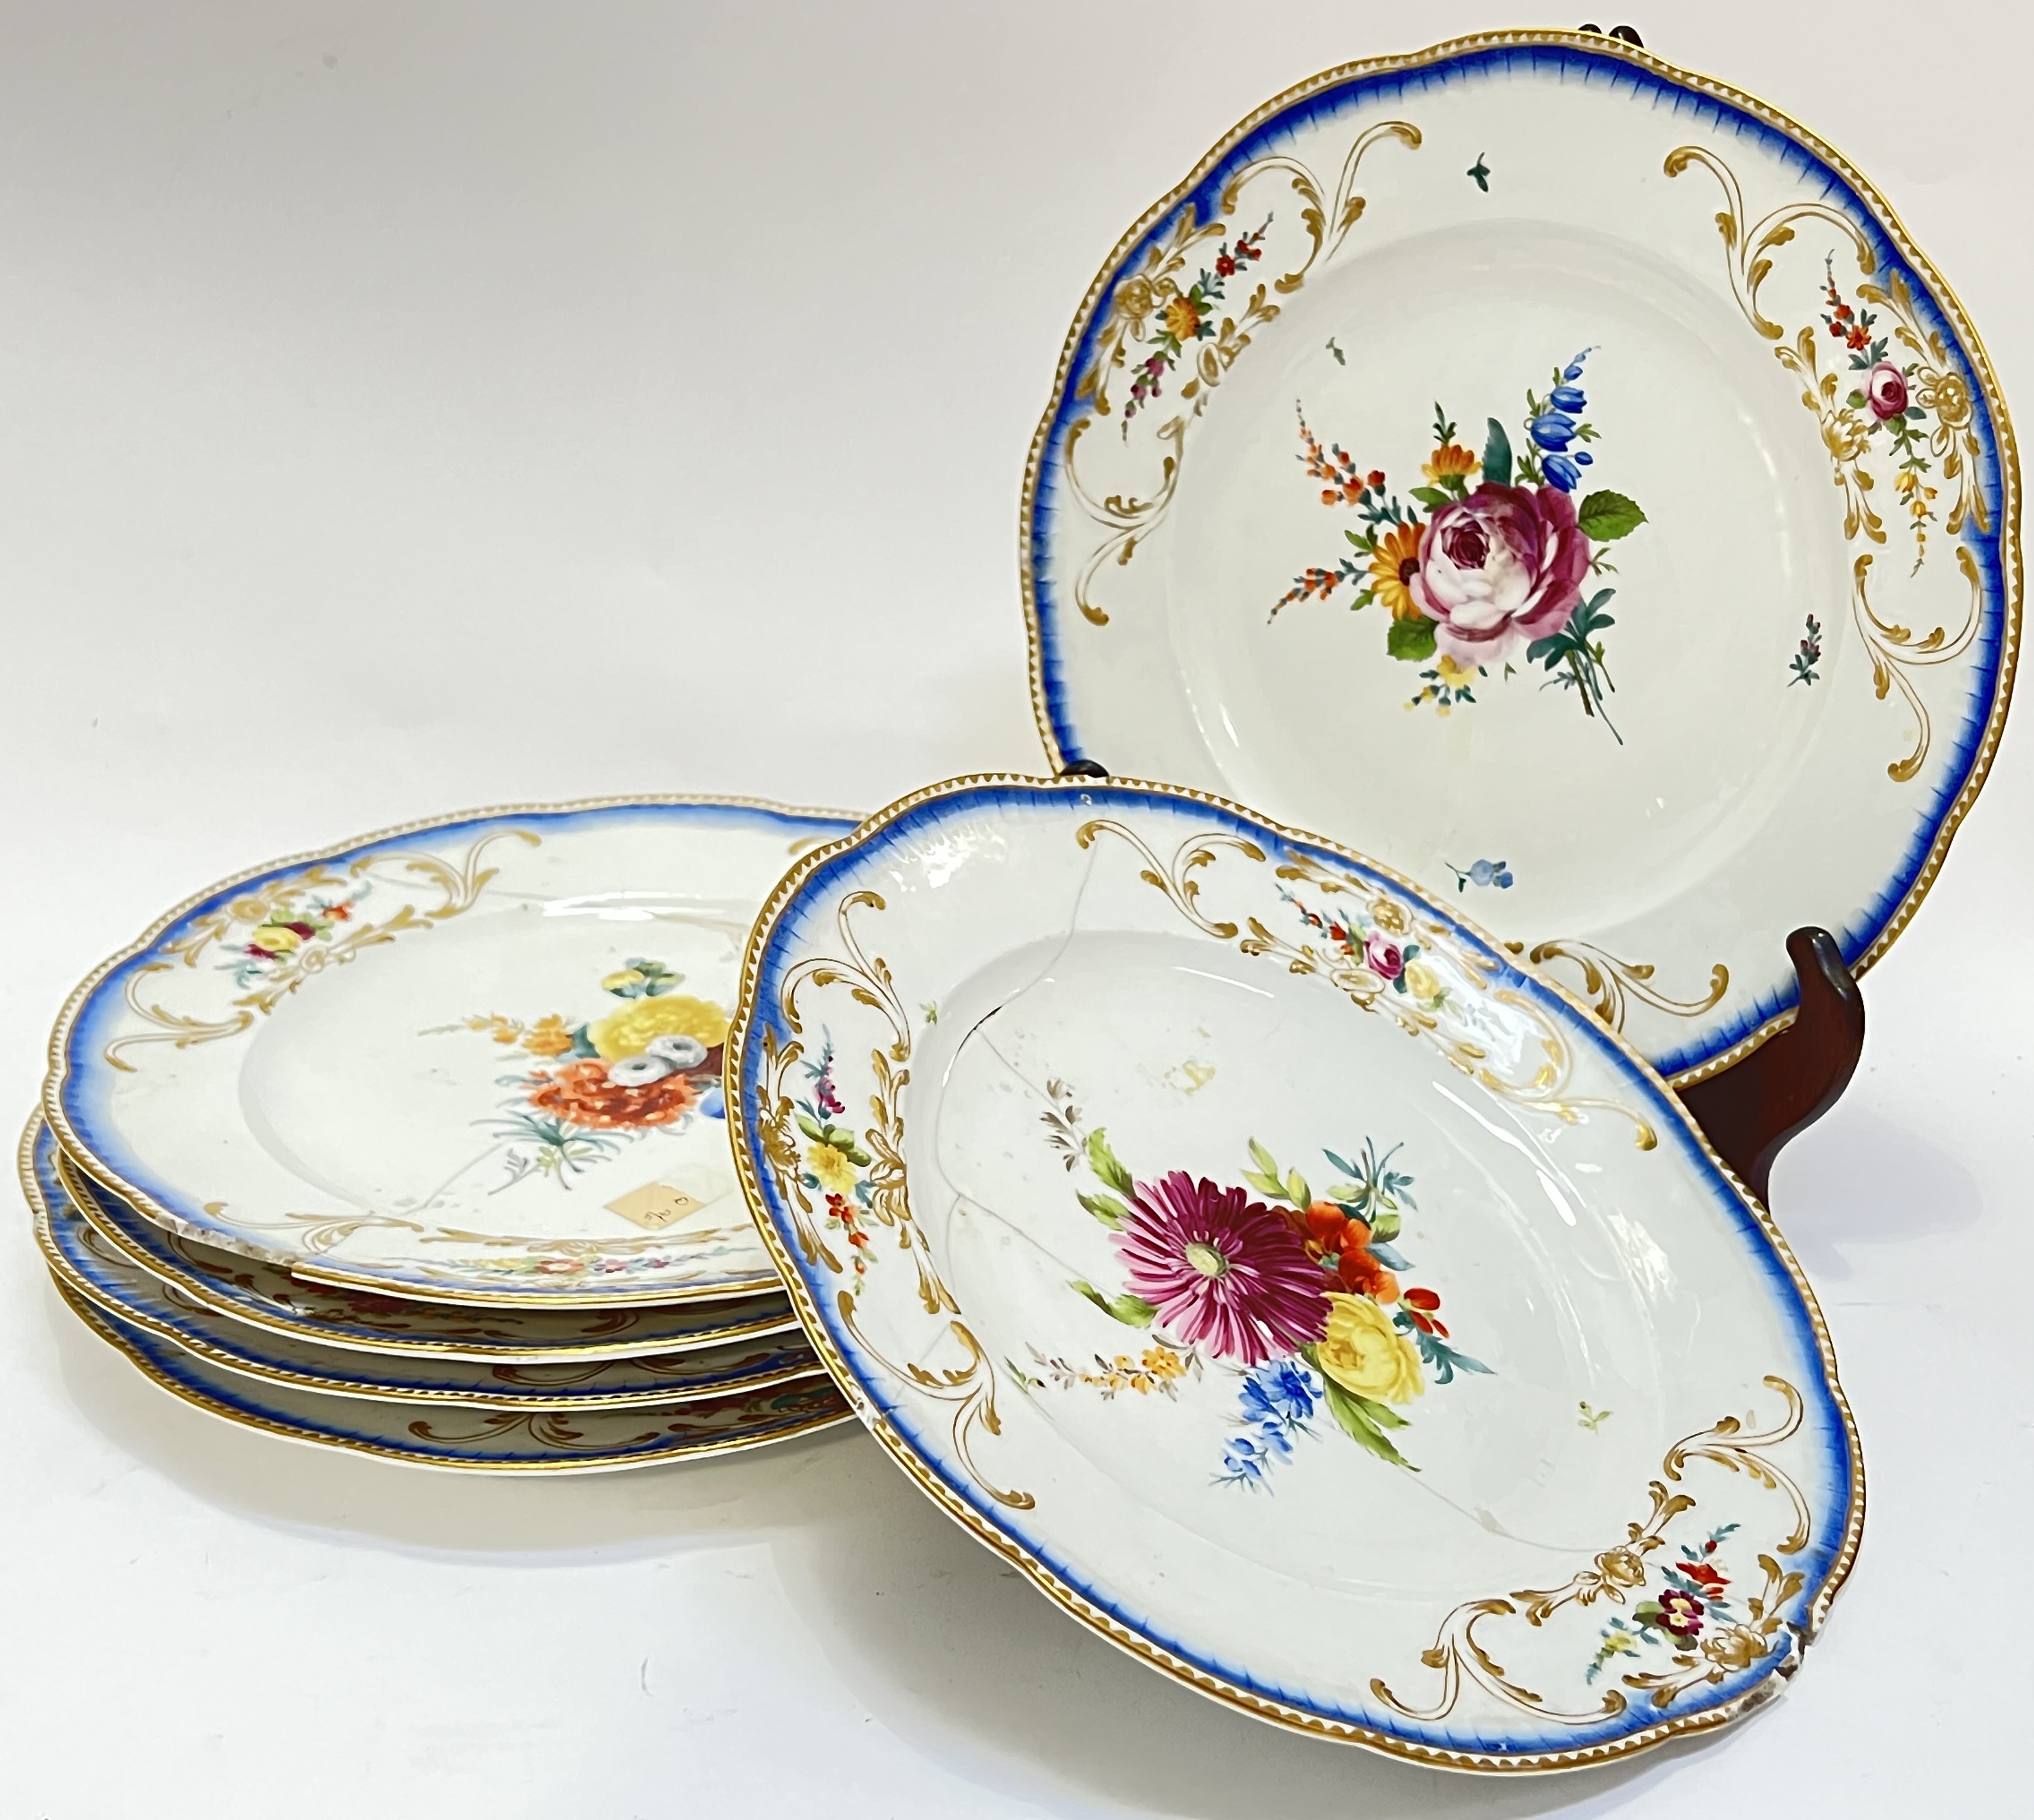 Six nineteenth century gilt-edge Meissen porcelain dishes each with moulded border and polychrome